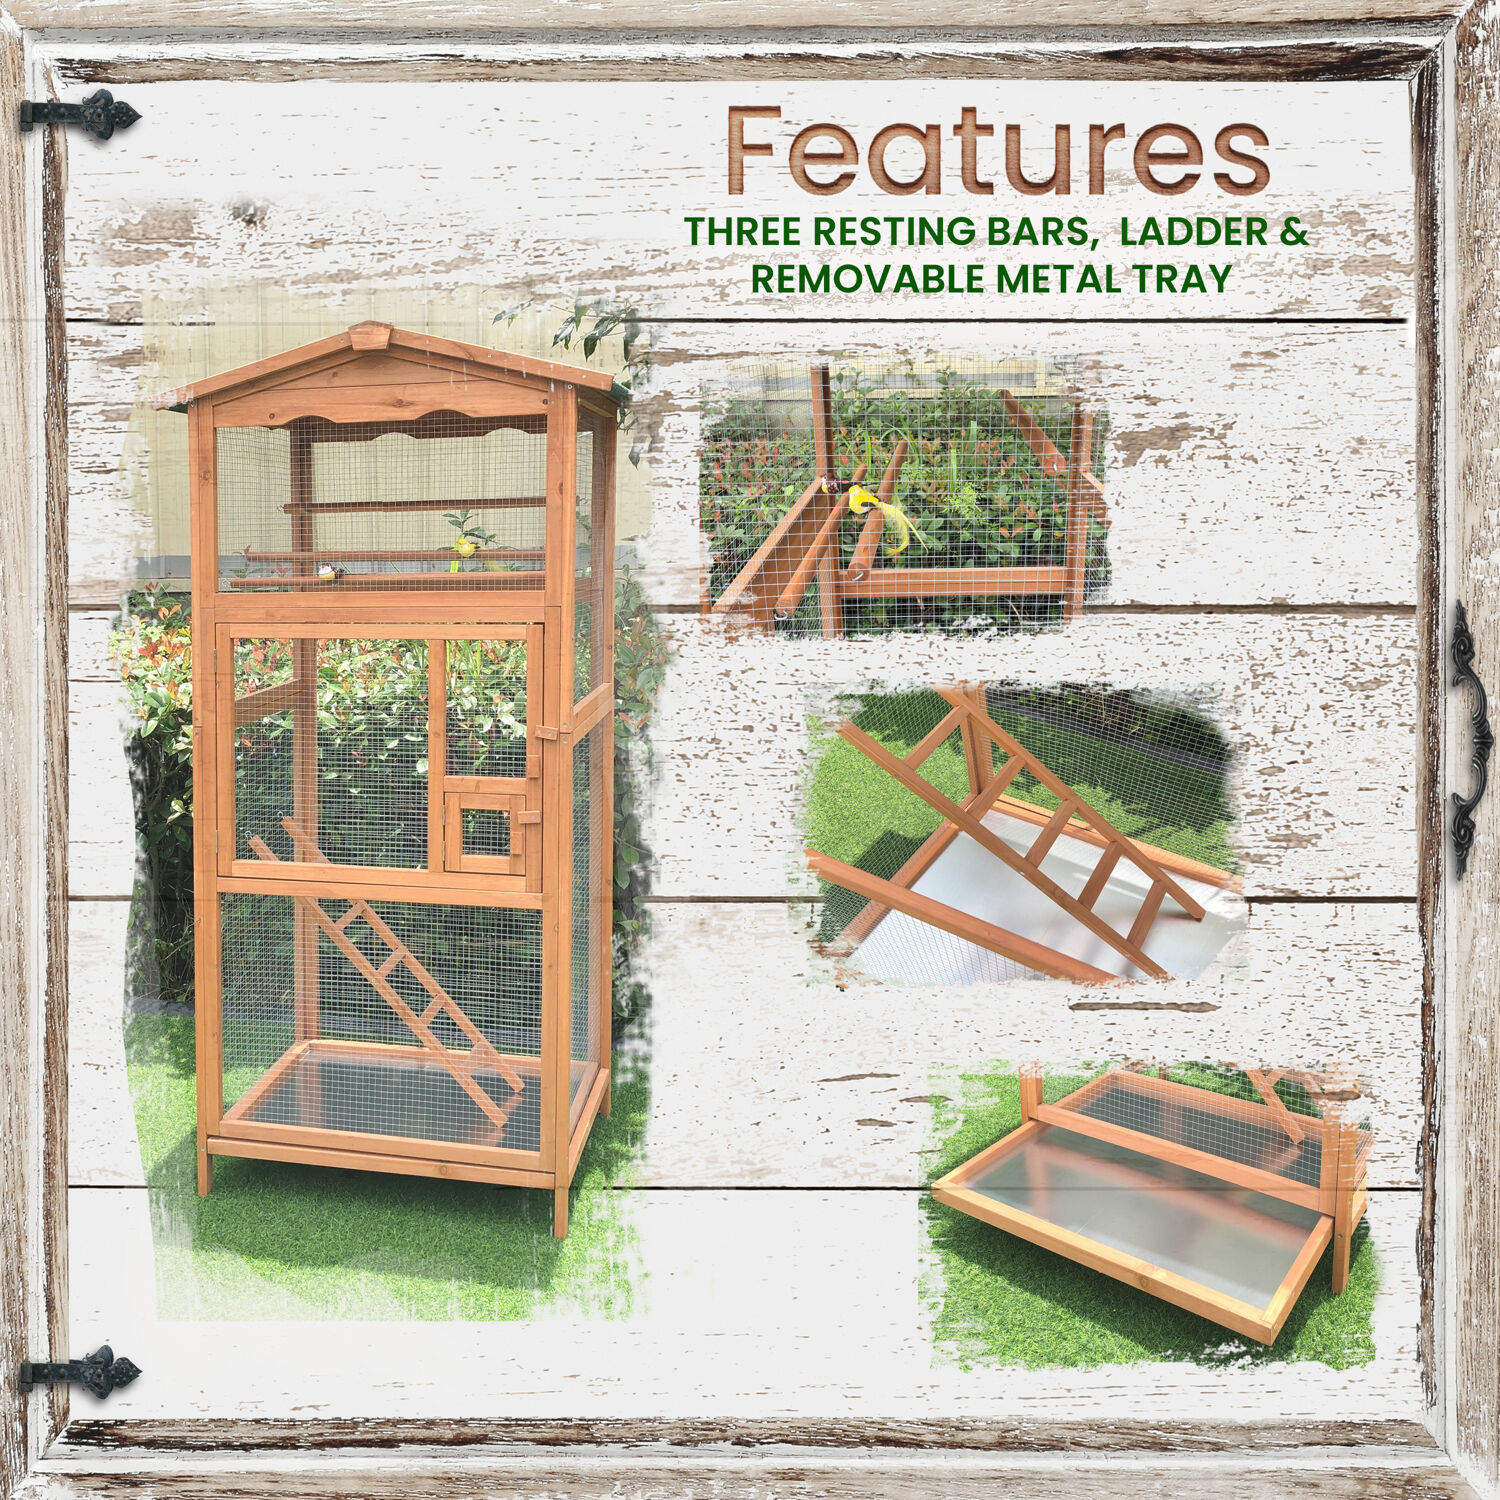 Hanover Outdoor Wooden Bird Cage with 3 Resting Bars, Ladder, Waterproof Roof and Removable Tray, 2.9 Ft. x 2.1 Ft. x 5.8 Ft. - image 3 of 12